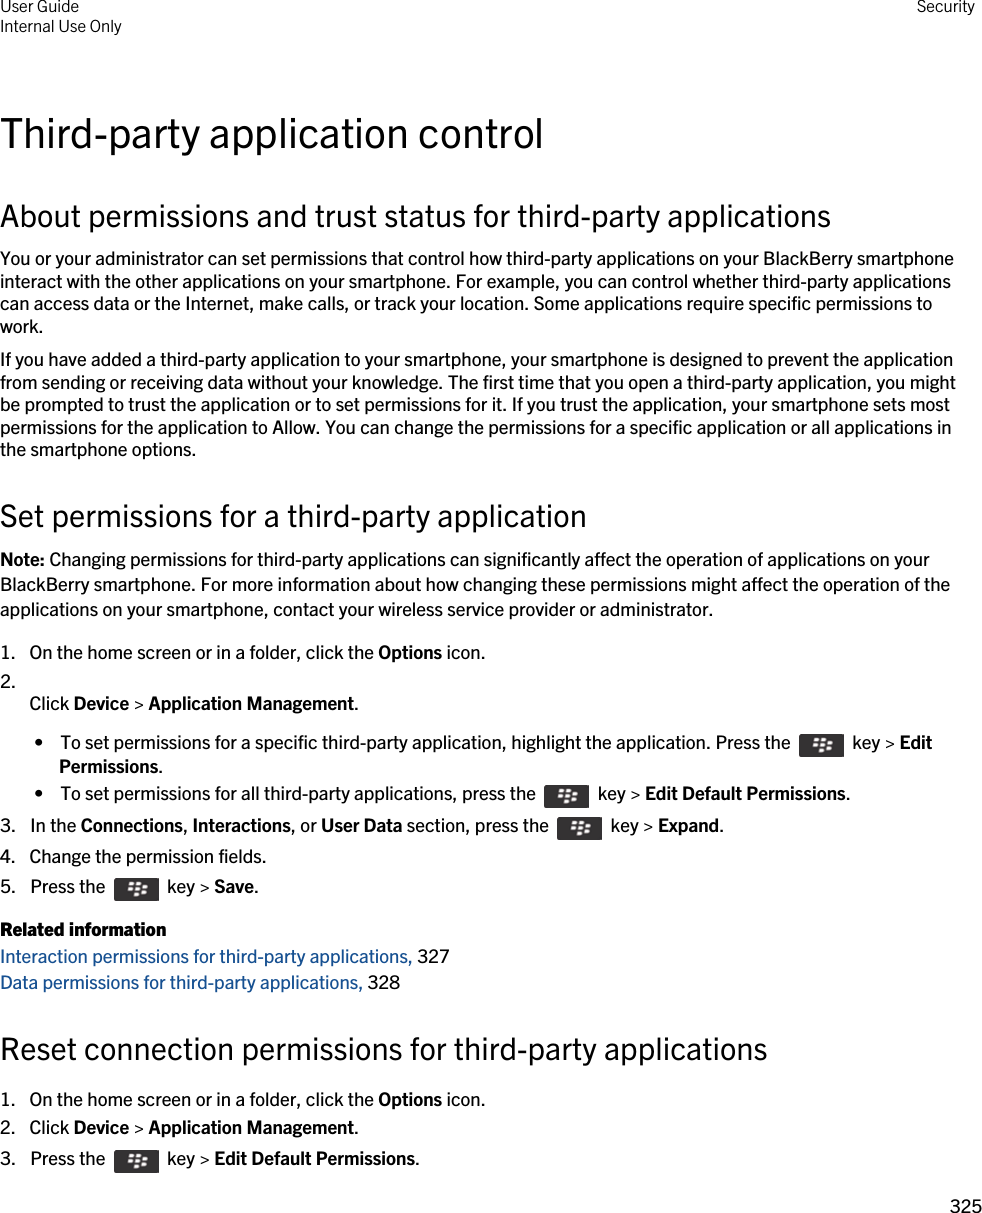 Third-party application controlAbout permissions and trust status for third-party applicationsYou or your administrator can set permissions that control how third-party applications on your BlackBerry smartphone interact with the other applications on your smartphone. For example, you can control whether third-party applications can access data or the Internet, make calls, or track your location. Some applications require specific permissions to work.If you have added a third-party application to your smartphone, your smartphone is designed to prevent the application from sending or receiving data without your knowledge. The first time that you open a third-party application, you might be prompted to trust the application or to set permissions for it. If you trust the application, your smartphone sets most permissions for the application to Allow. You can change the permissions for a specific application or all applications in the smartphone options.Set permissions for a third-party applicationNote: Changing permissions for third-party applications can significantly affect the operation of applications on your BlackBerry smartphone. For more information about how changing these permissions might affect the operation of the applications on your smartphone, contact your wireless service provider or administrator.1. On the home screen or in a folder, click the Options icon.2.  Click Device &gt; Application Management. •  To set permissions for a specific third-party application, highlight the application. Press the    key &gt; Edit Permissions. •  To set permissions for all third-party applications, press the    key &gt; Edit Default Permissions.3.  In the Connections, Interactions, or User Data section, press the    key &gt; Expand.4. Change the permission fields.5.  Press the    key &gt; Save. Related informationInteraction permissions for third-party applications, 327Data permissions for third-party applications, 328Reset connection permissions for third-party applications1. On the home screen or in a folder, click the Options icon.2. Click Device &gt; Application Management.3.  Press the    key &gt; Edit Default Permissions. User GuideInternal Use Only Security325 